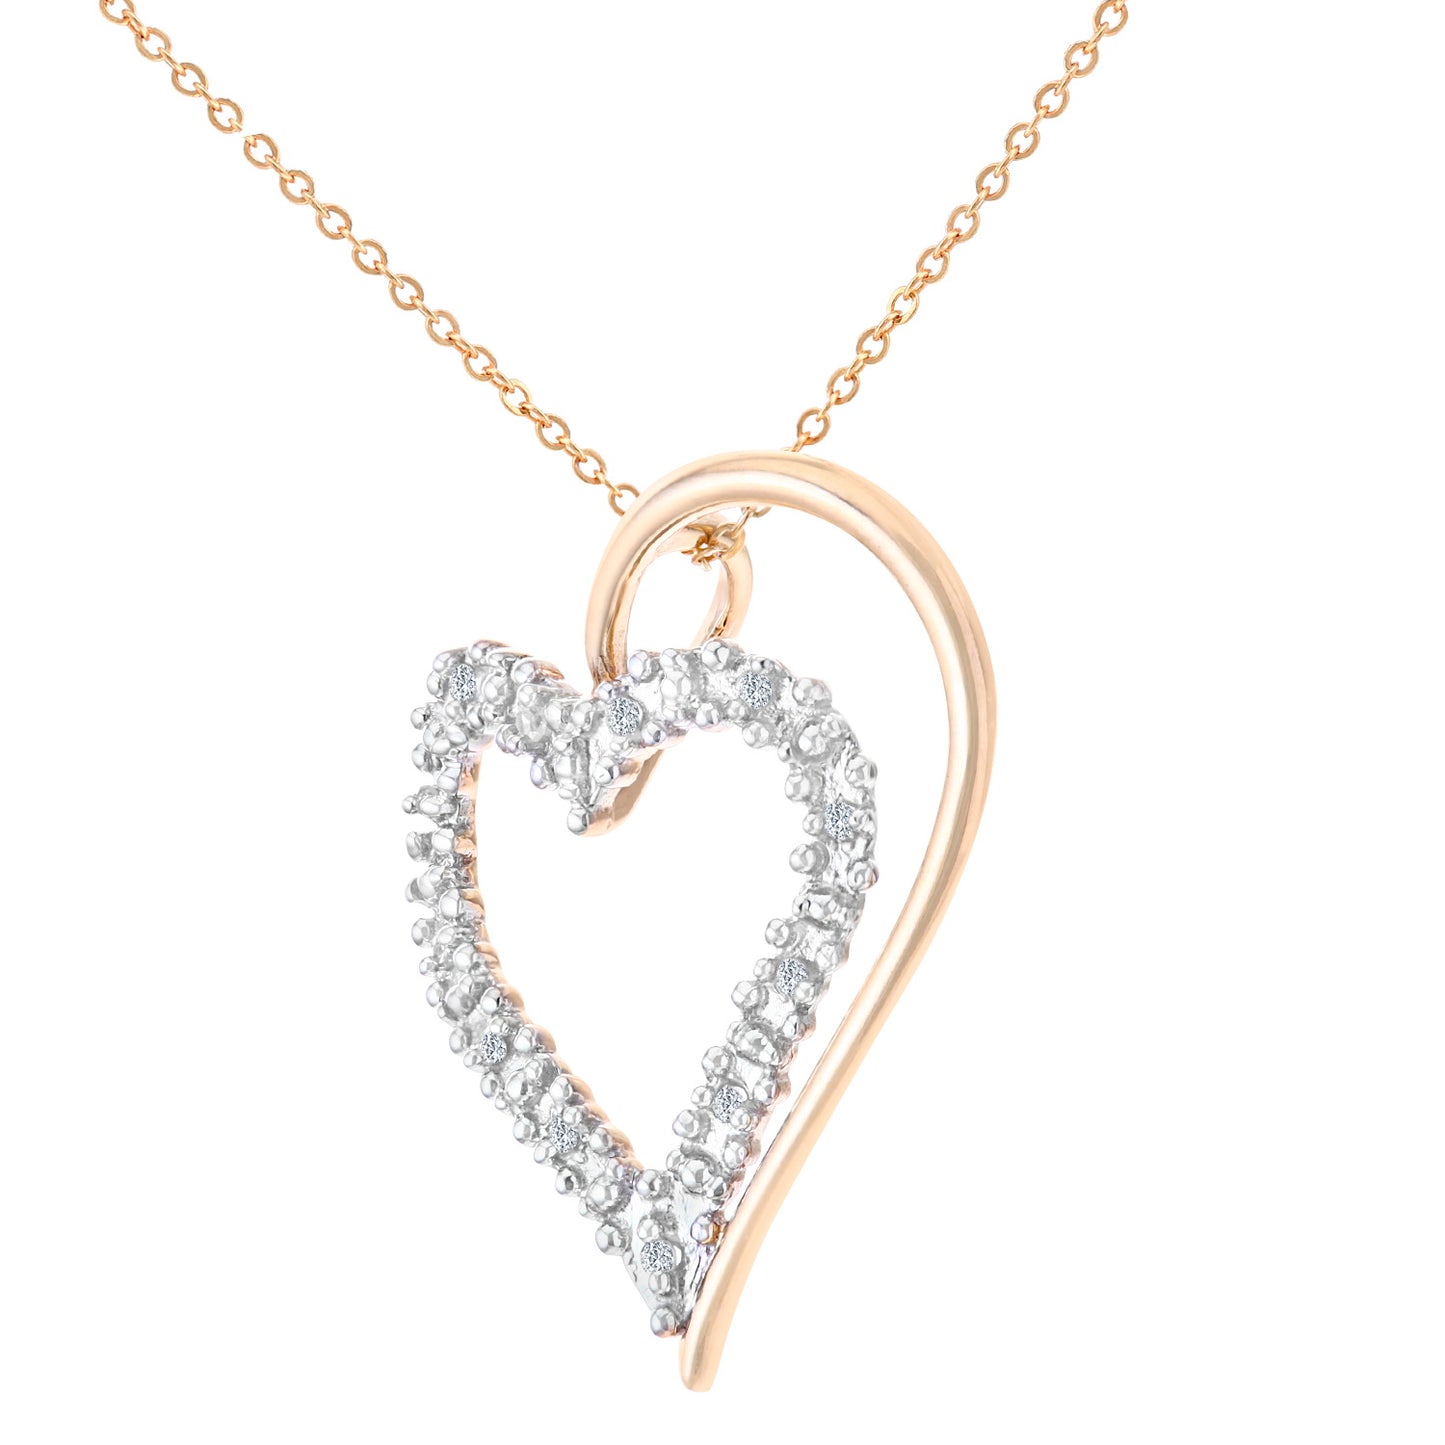 9ct Gold  Round 5pts Diamond Heart Pendant Necklace 18 inch - PP0AXL3175Y